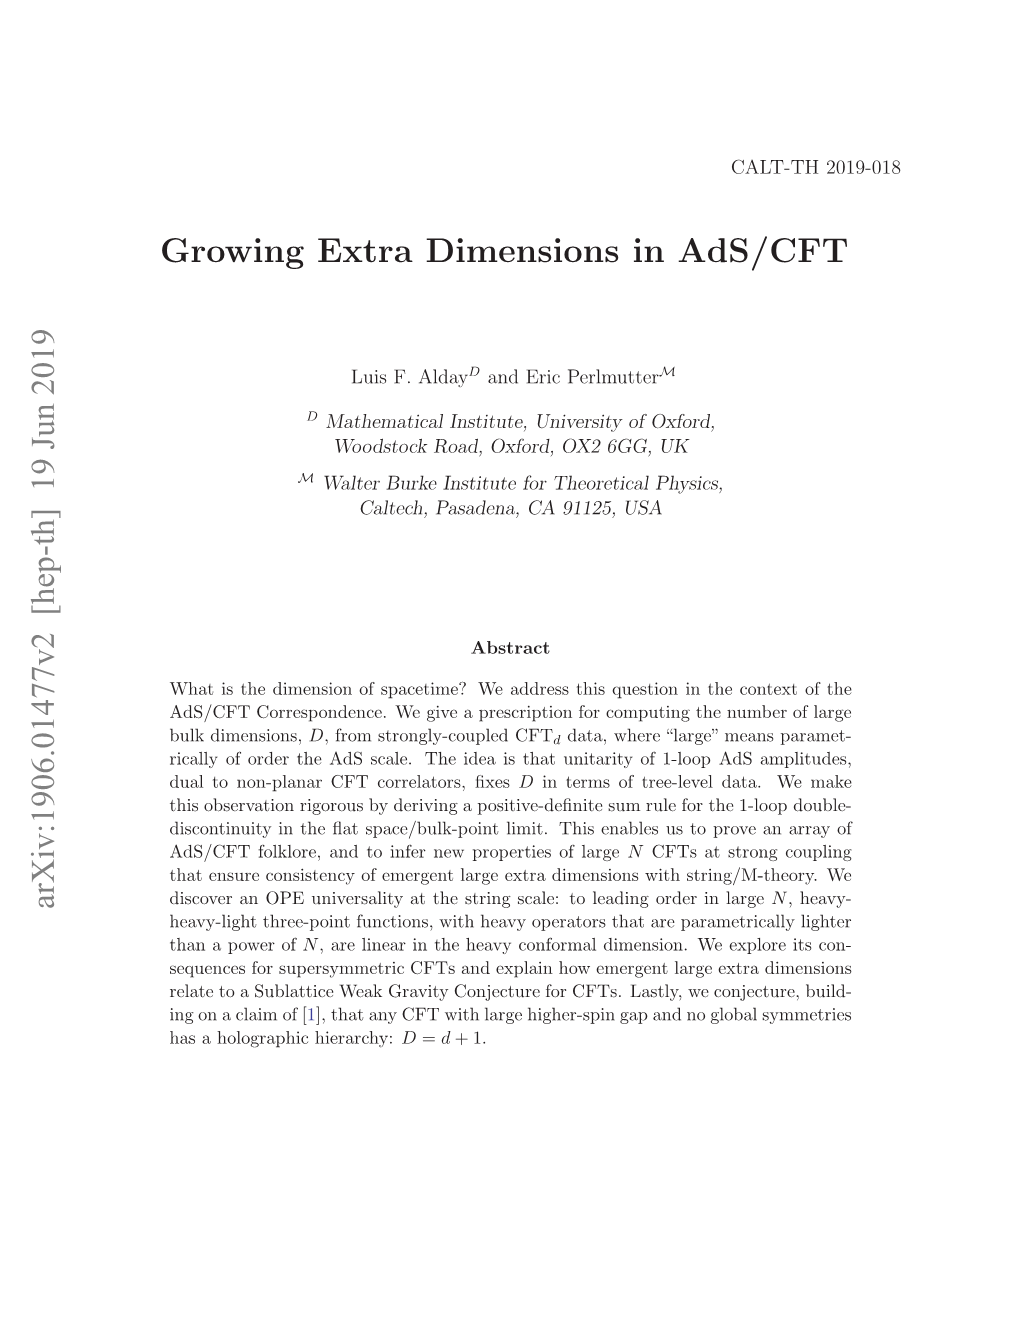 Growing Extra Dimensions in Ads/CFT